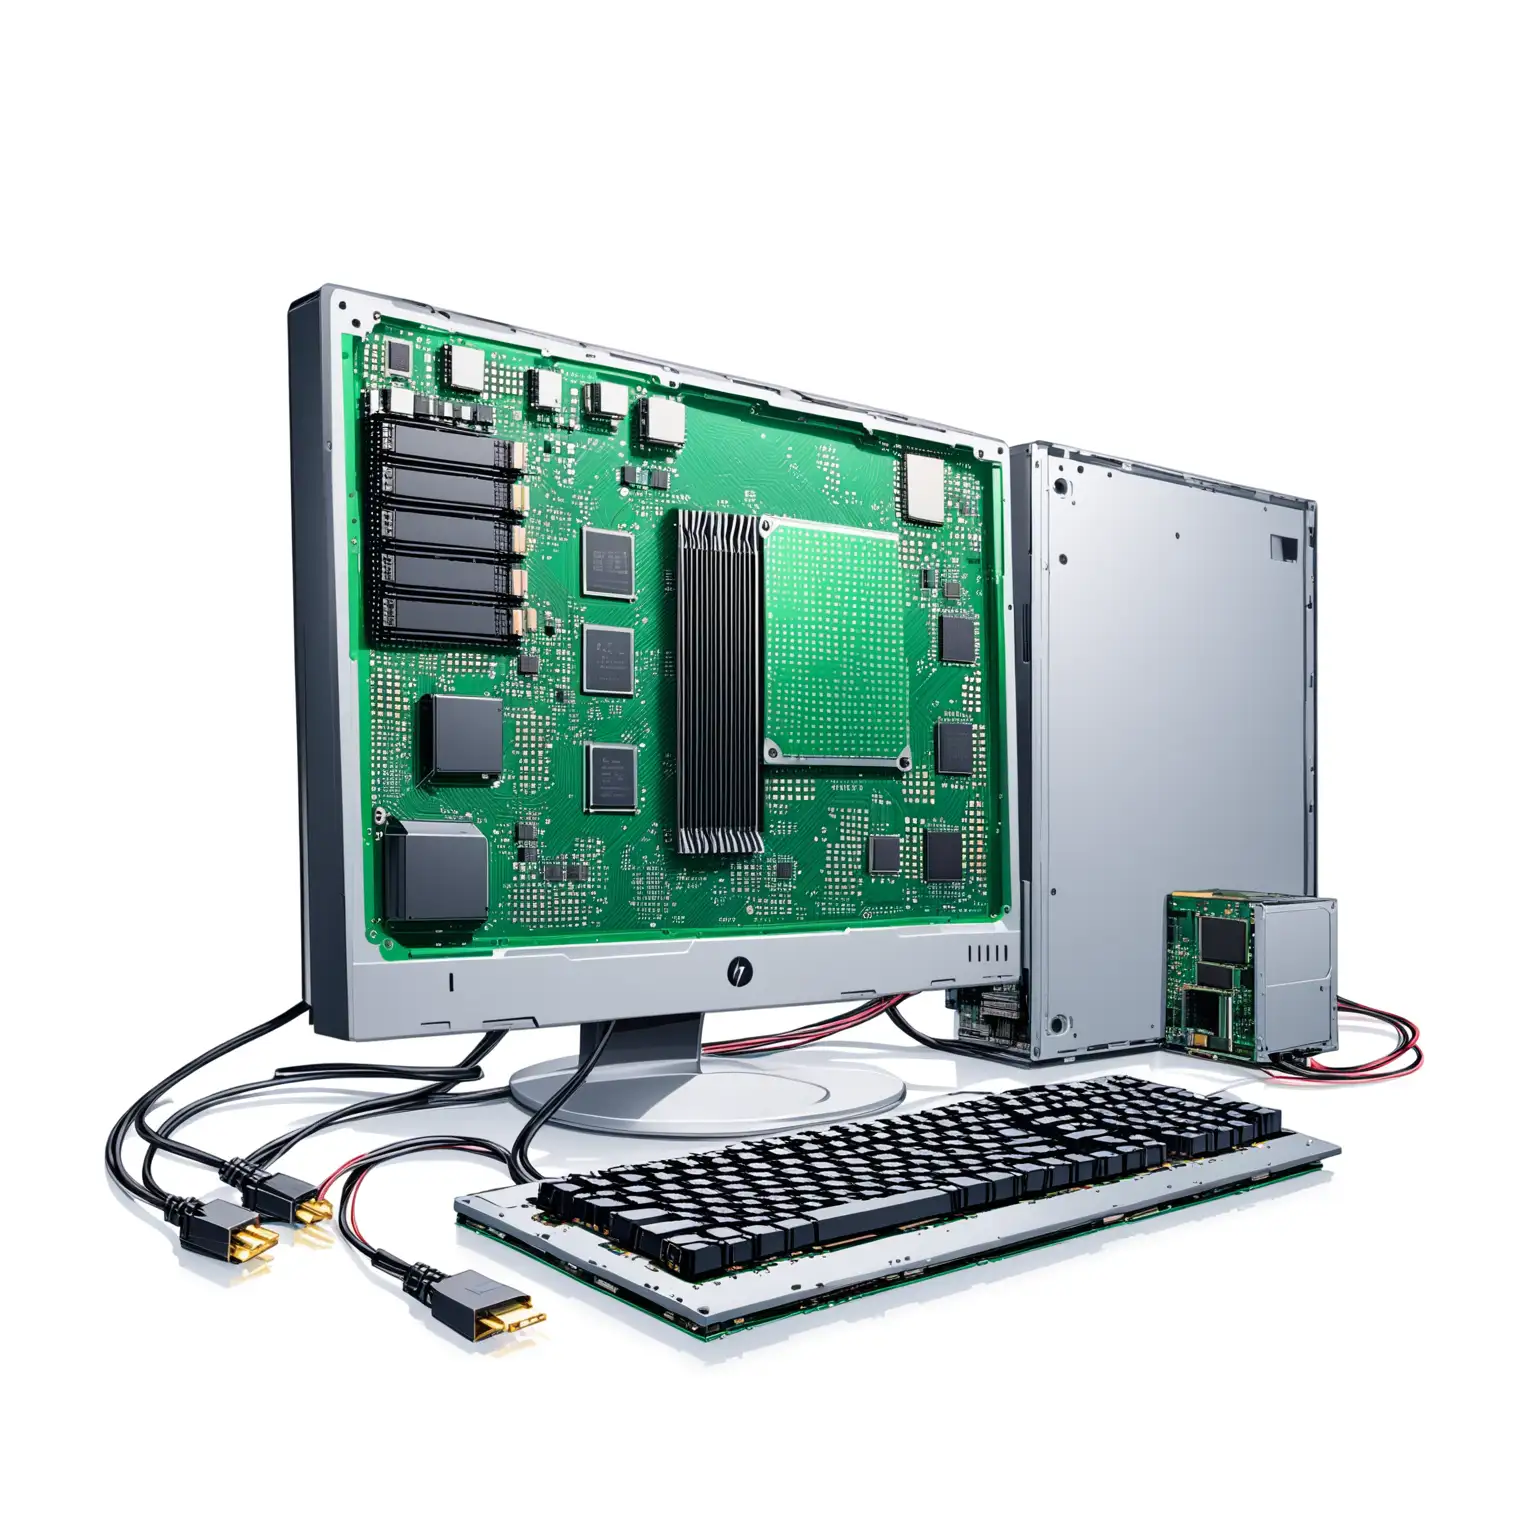 Professional-Computer-Repair-Service-on-Clean-White-Background